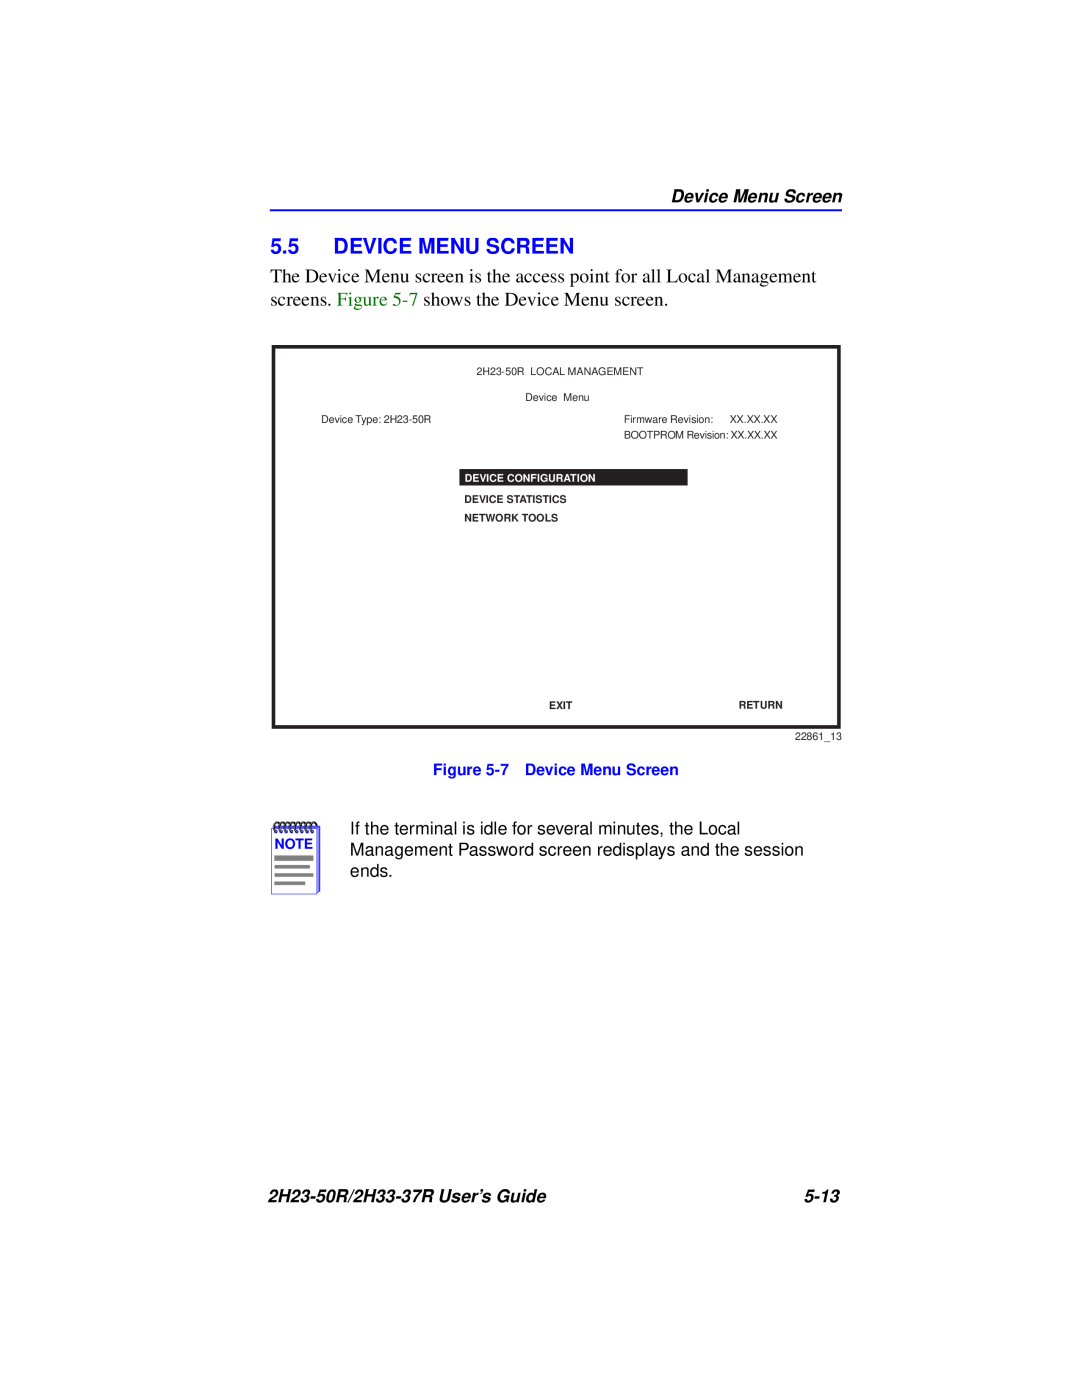 Cabletron Systems manual 2H23-50R/2H33-37R User’s Guide, 5-13, 7 Device Menu Screen, Device Configuration 